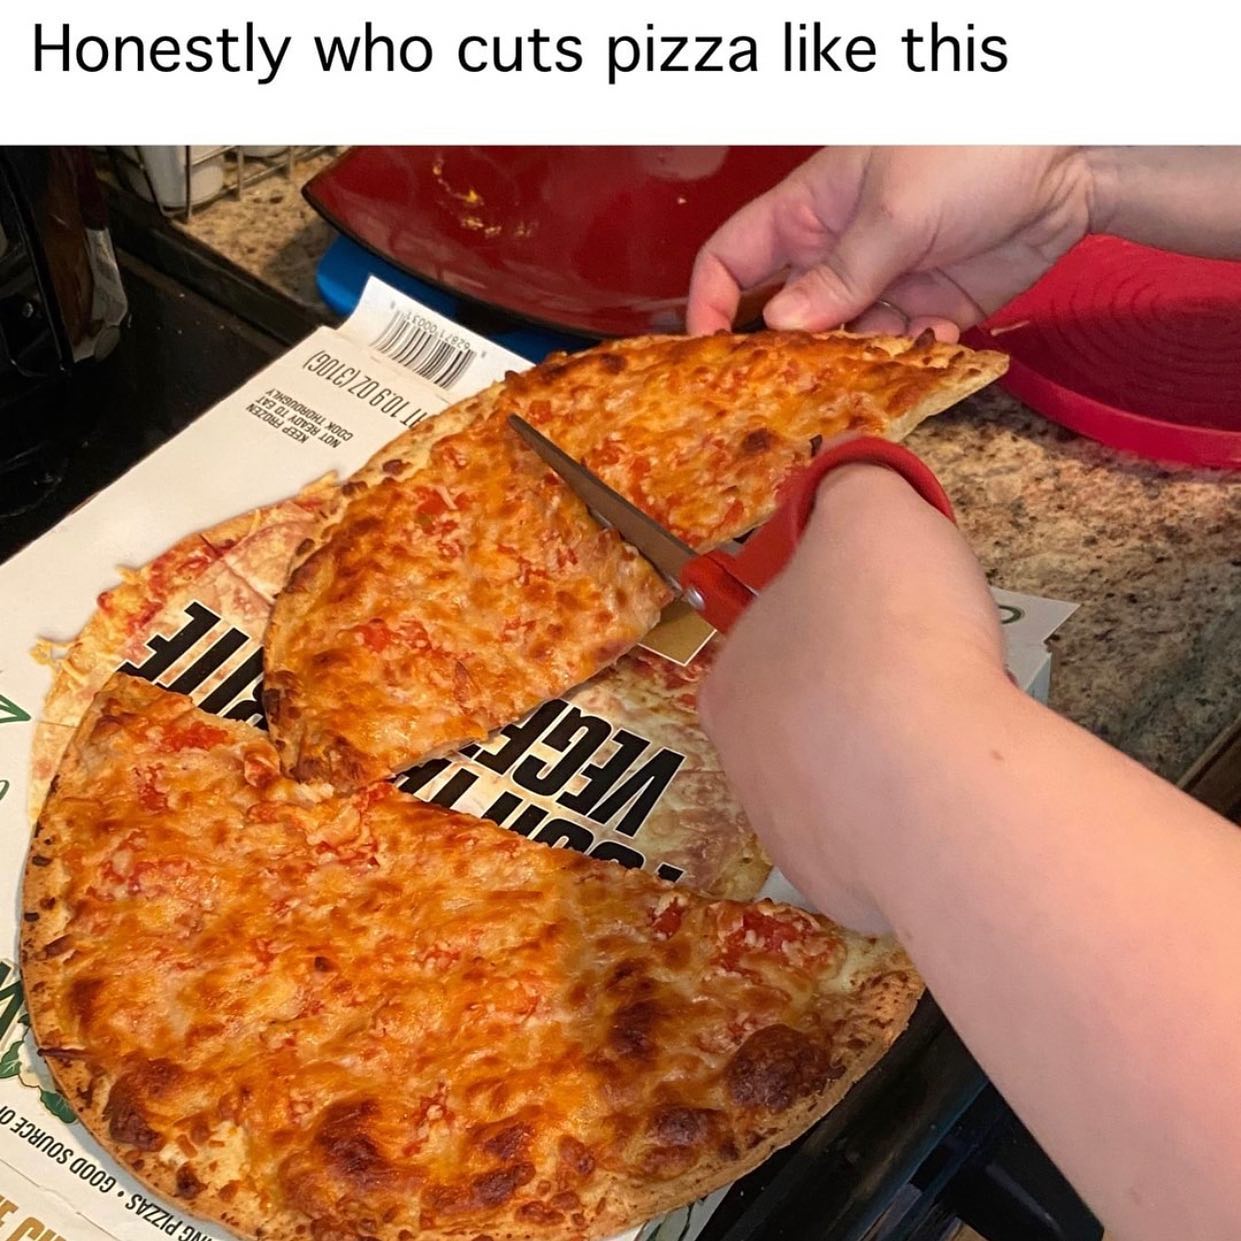 dank memes - pizza cheese - Wg Pizzas. Good Source O Vege Ute Keep Frozen Not Ready To Eat Cook Thorously It 10.90Z 3106 62871000 Honestly who cuts pizza this